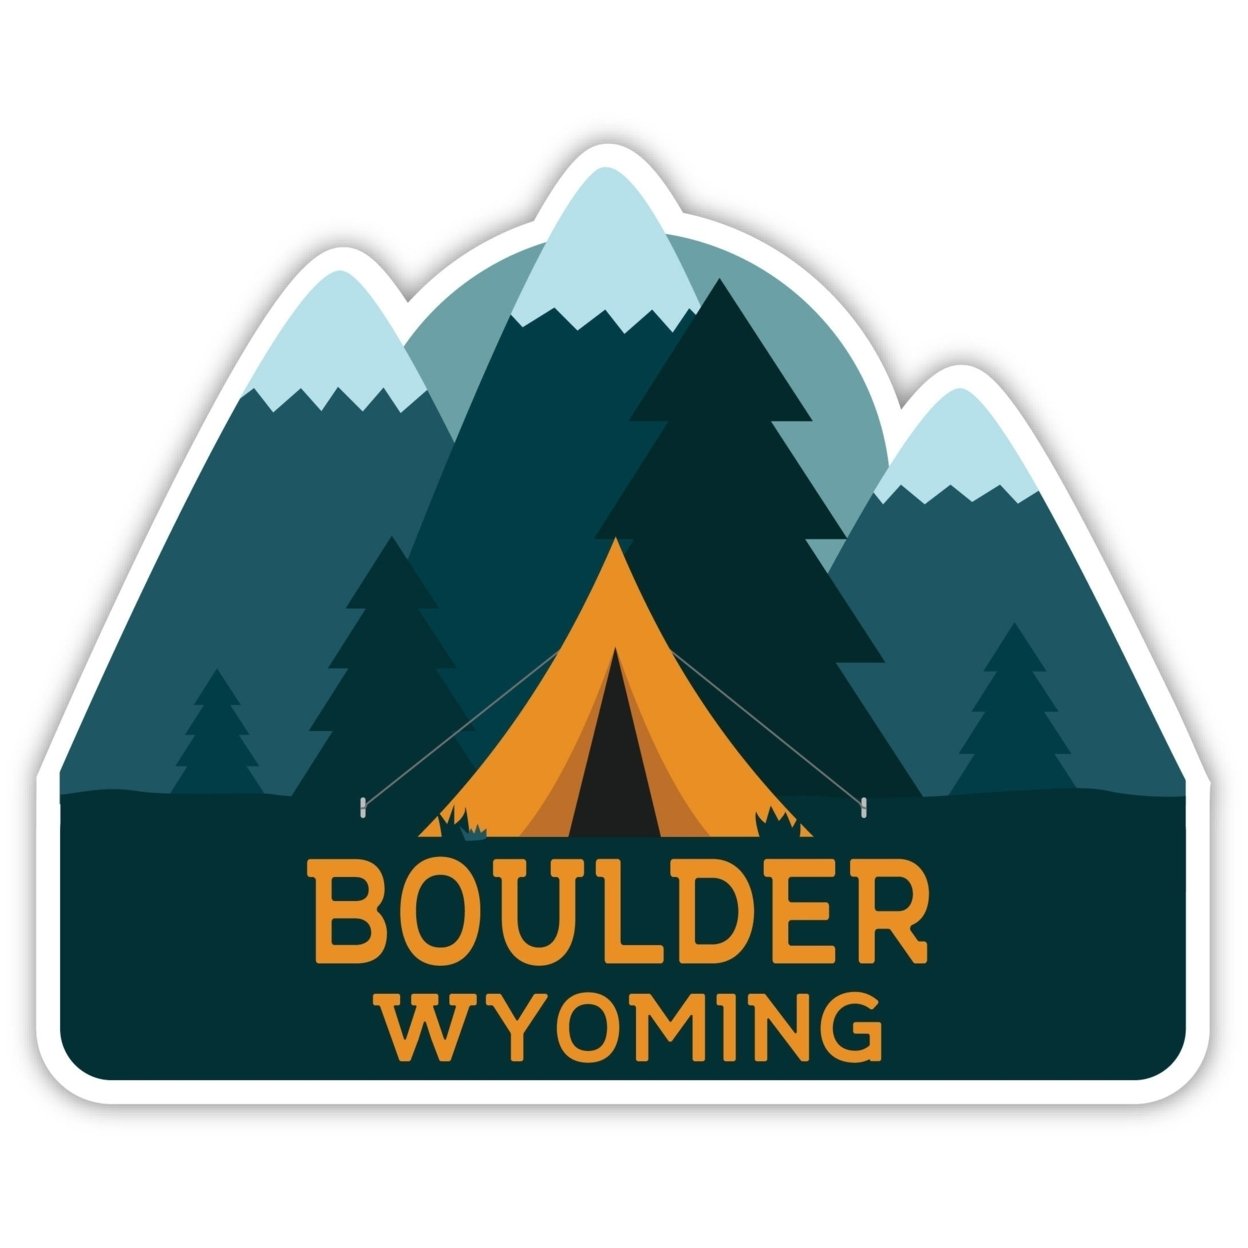 Boulder Wyoming Souvenir Decorative Stickers (Choose Theme And Size) - 4-Pack, 12-Inch, Tent